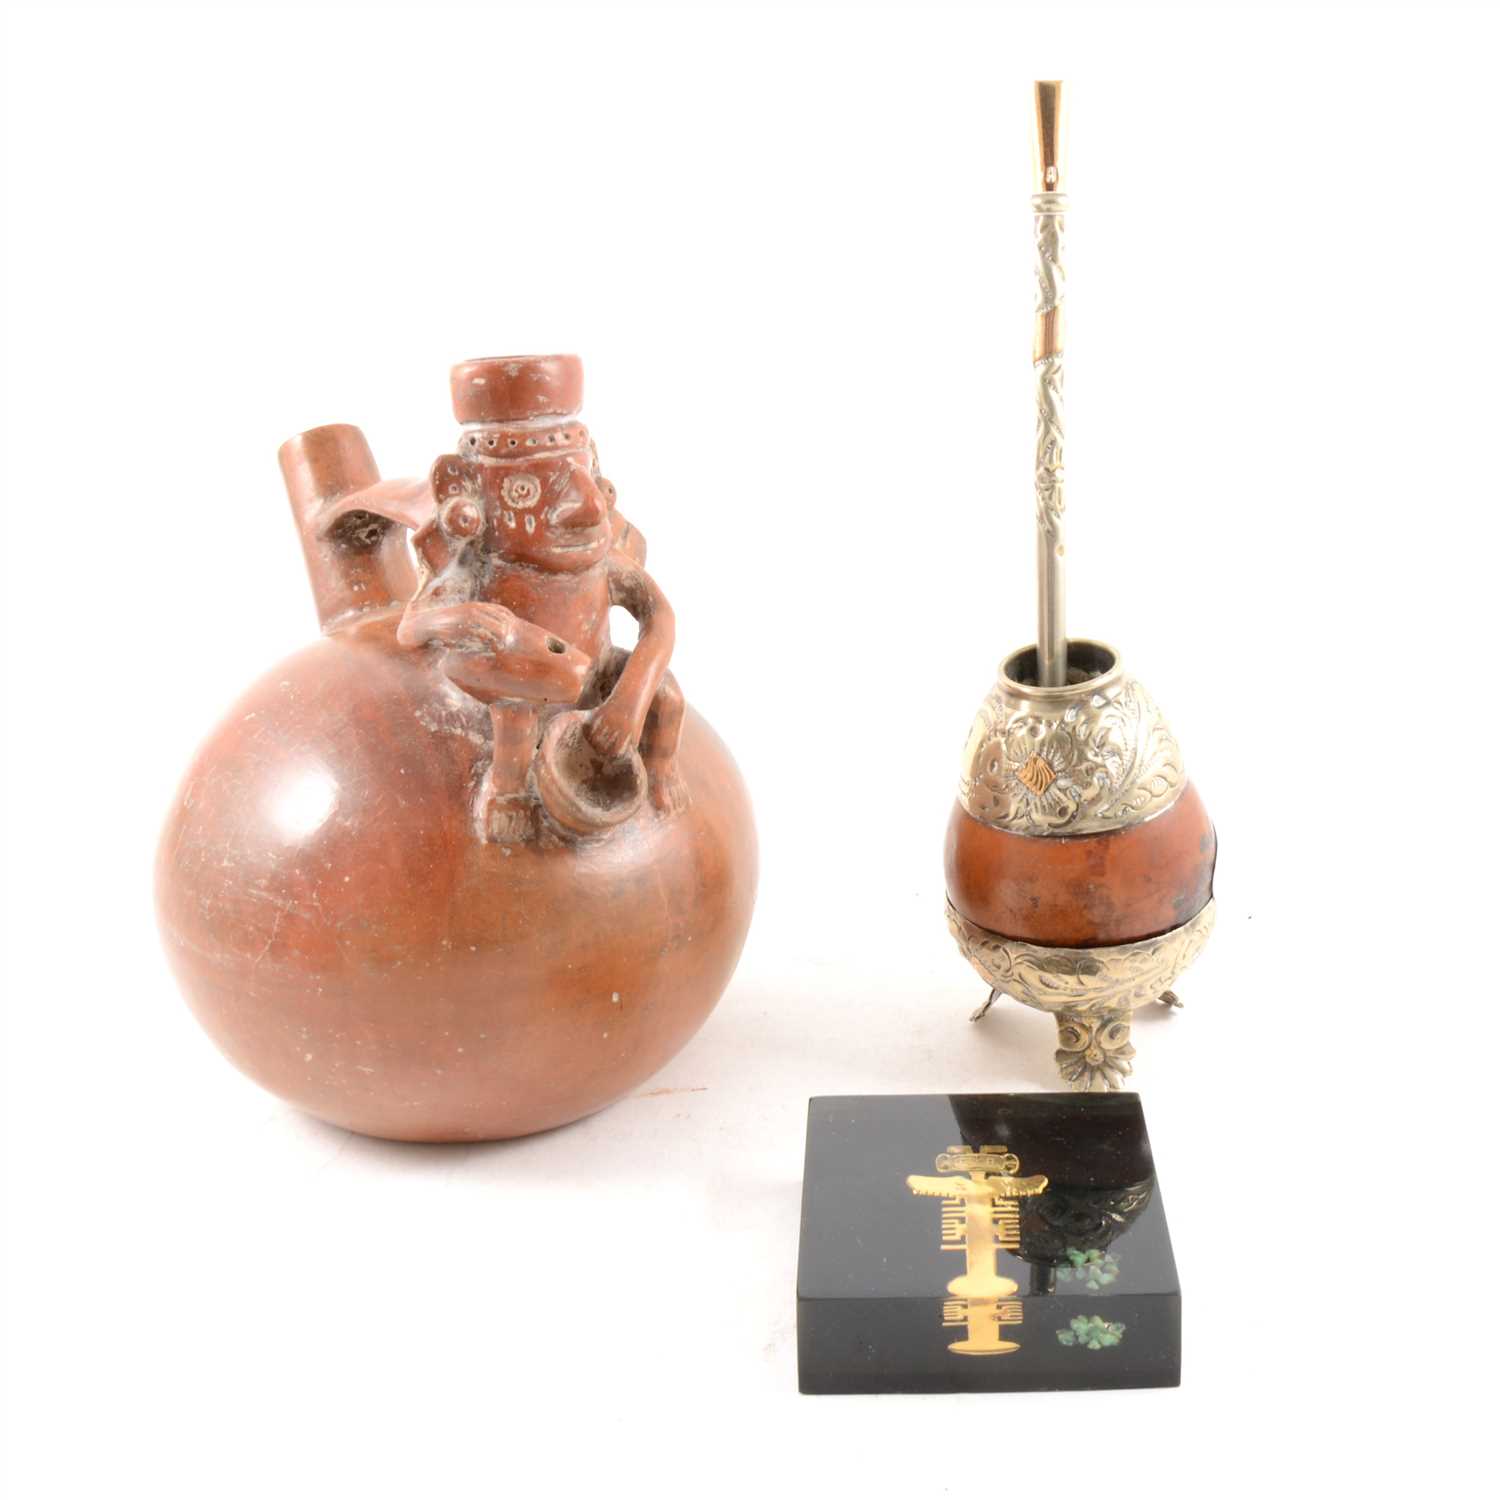 Lot 87 - South American style clay pot, smoking vessel and a paperweight with gold inclusions.